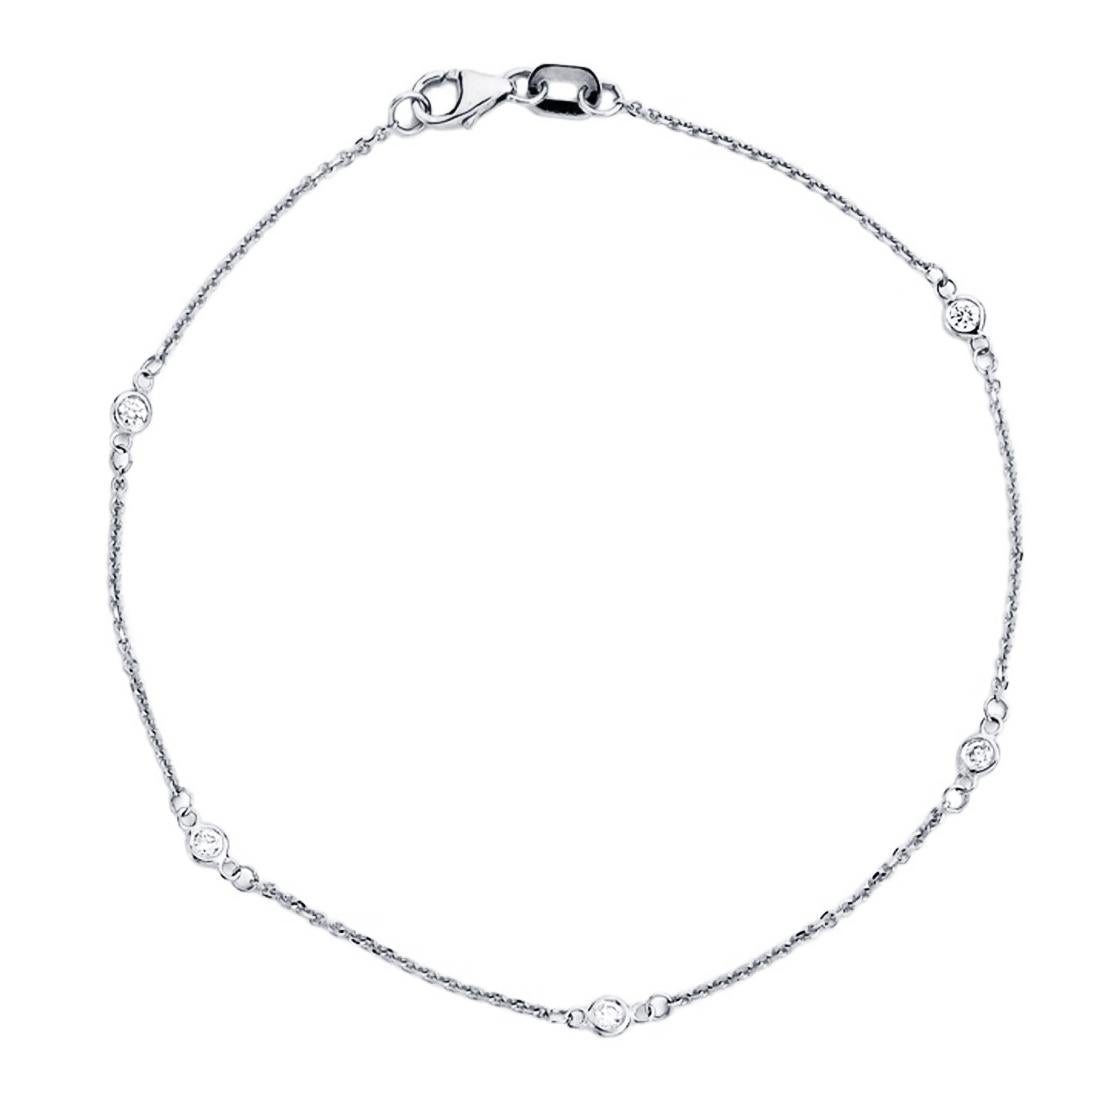 Diamonds by the yard bracelet totaling 0.50 carats set in 14 kt white gold 
Diana M. is a leading supplier of top-quality fine jewelry for over 35 years.
Diana M is one-stop shop for all your jewelry shopping, carrying line of diamond rings,